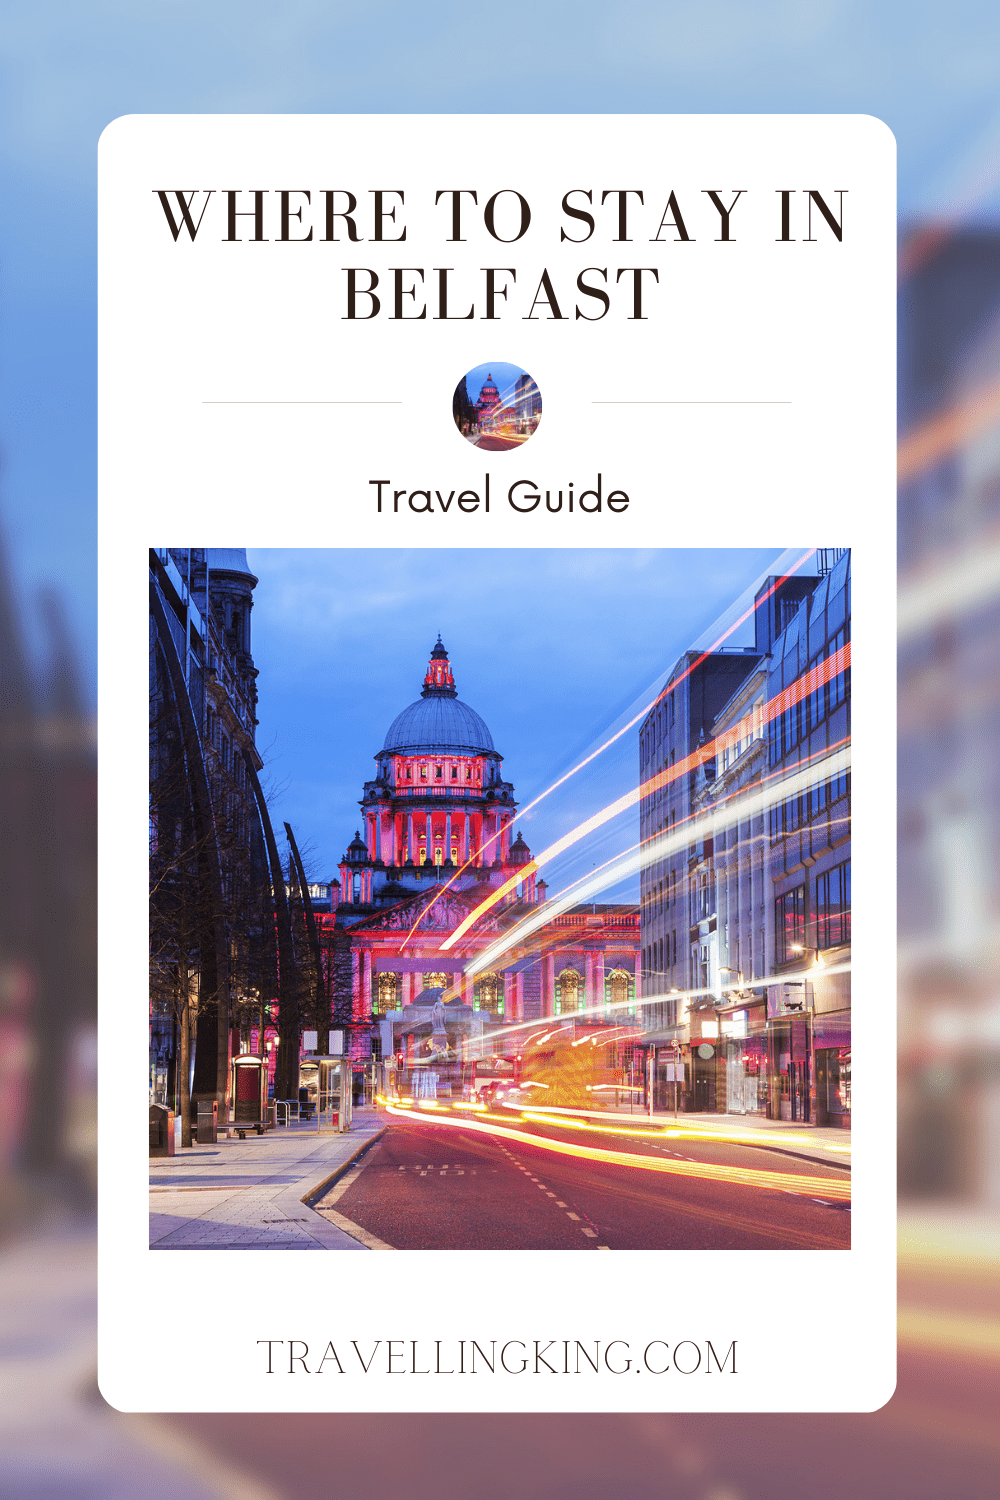 Where to stay in Belfast